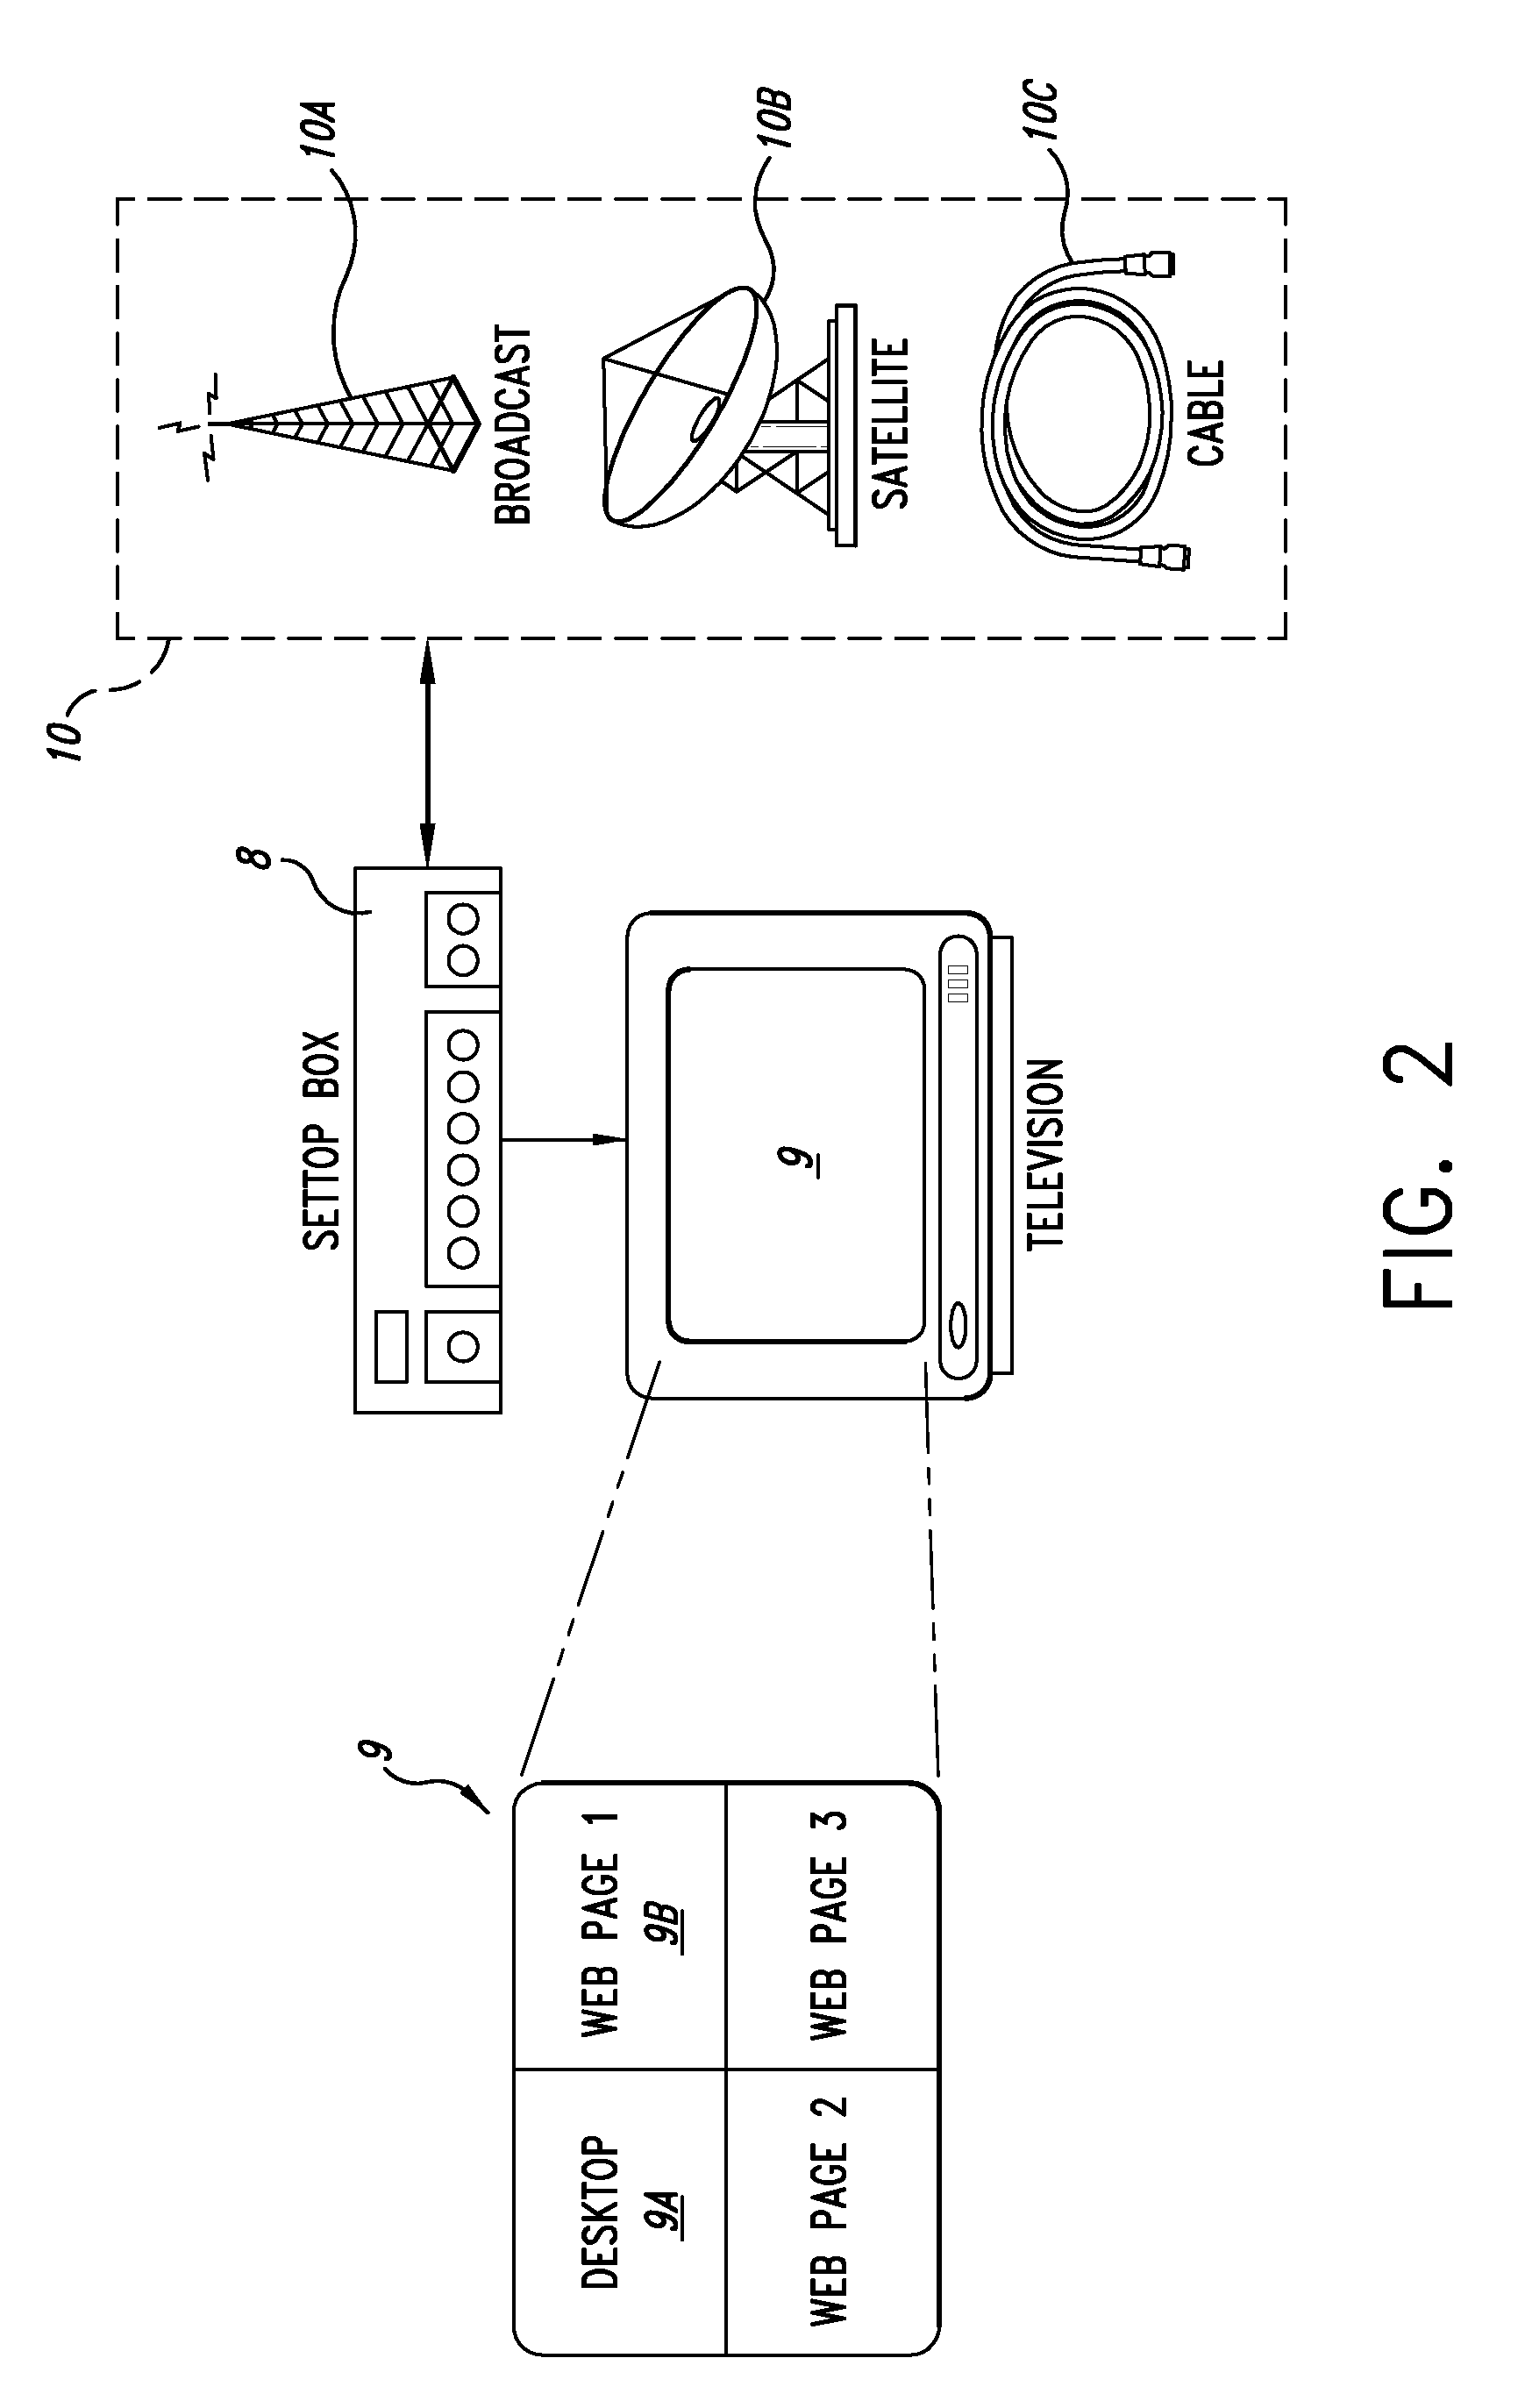 Method and system for controlling a comlementary user interface on a display surface